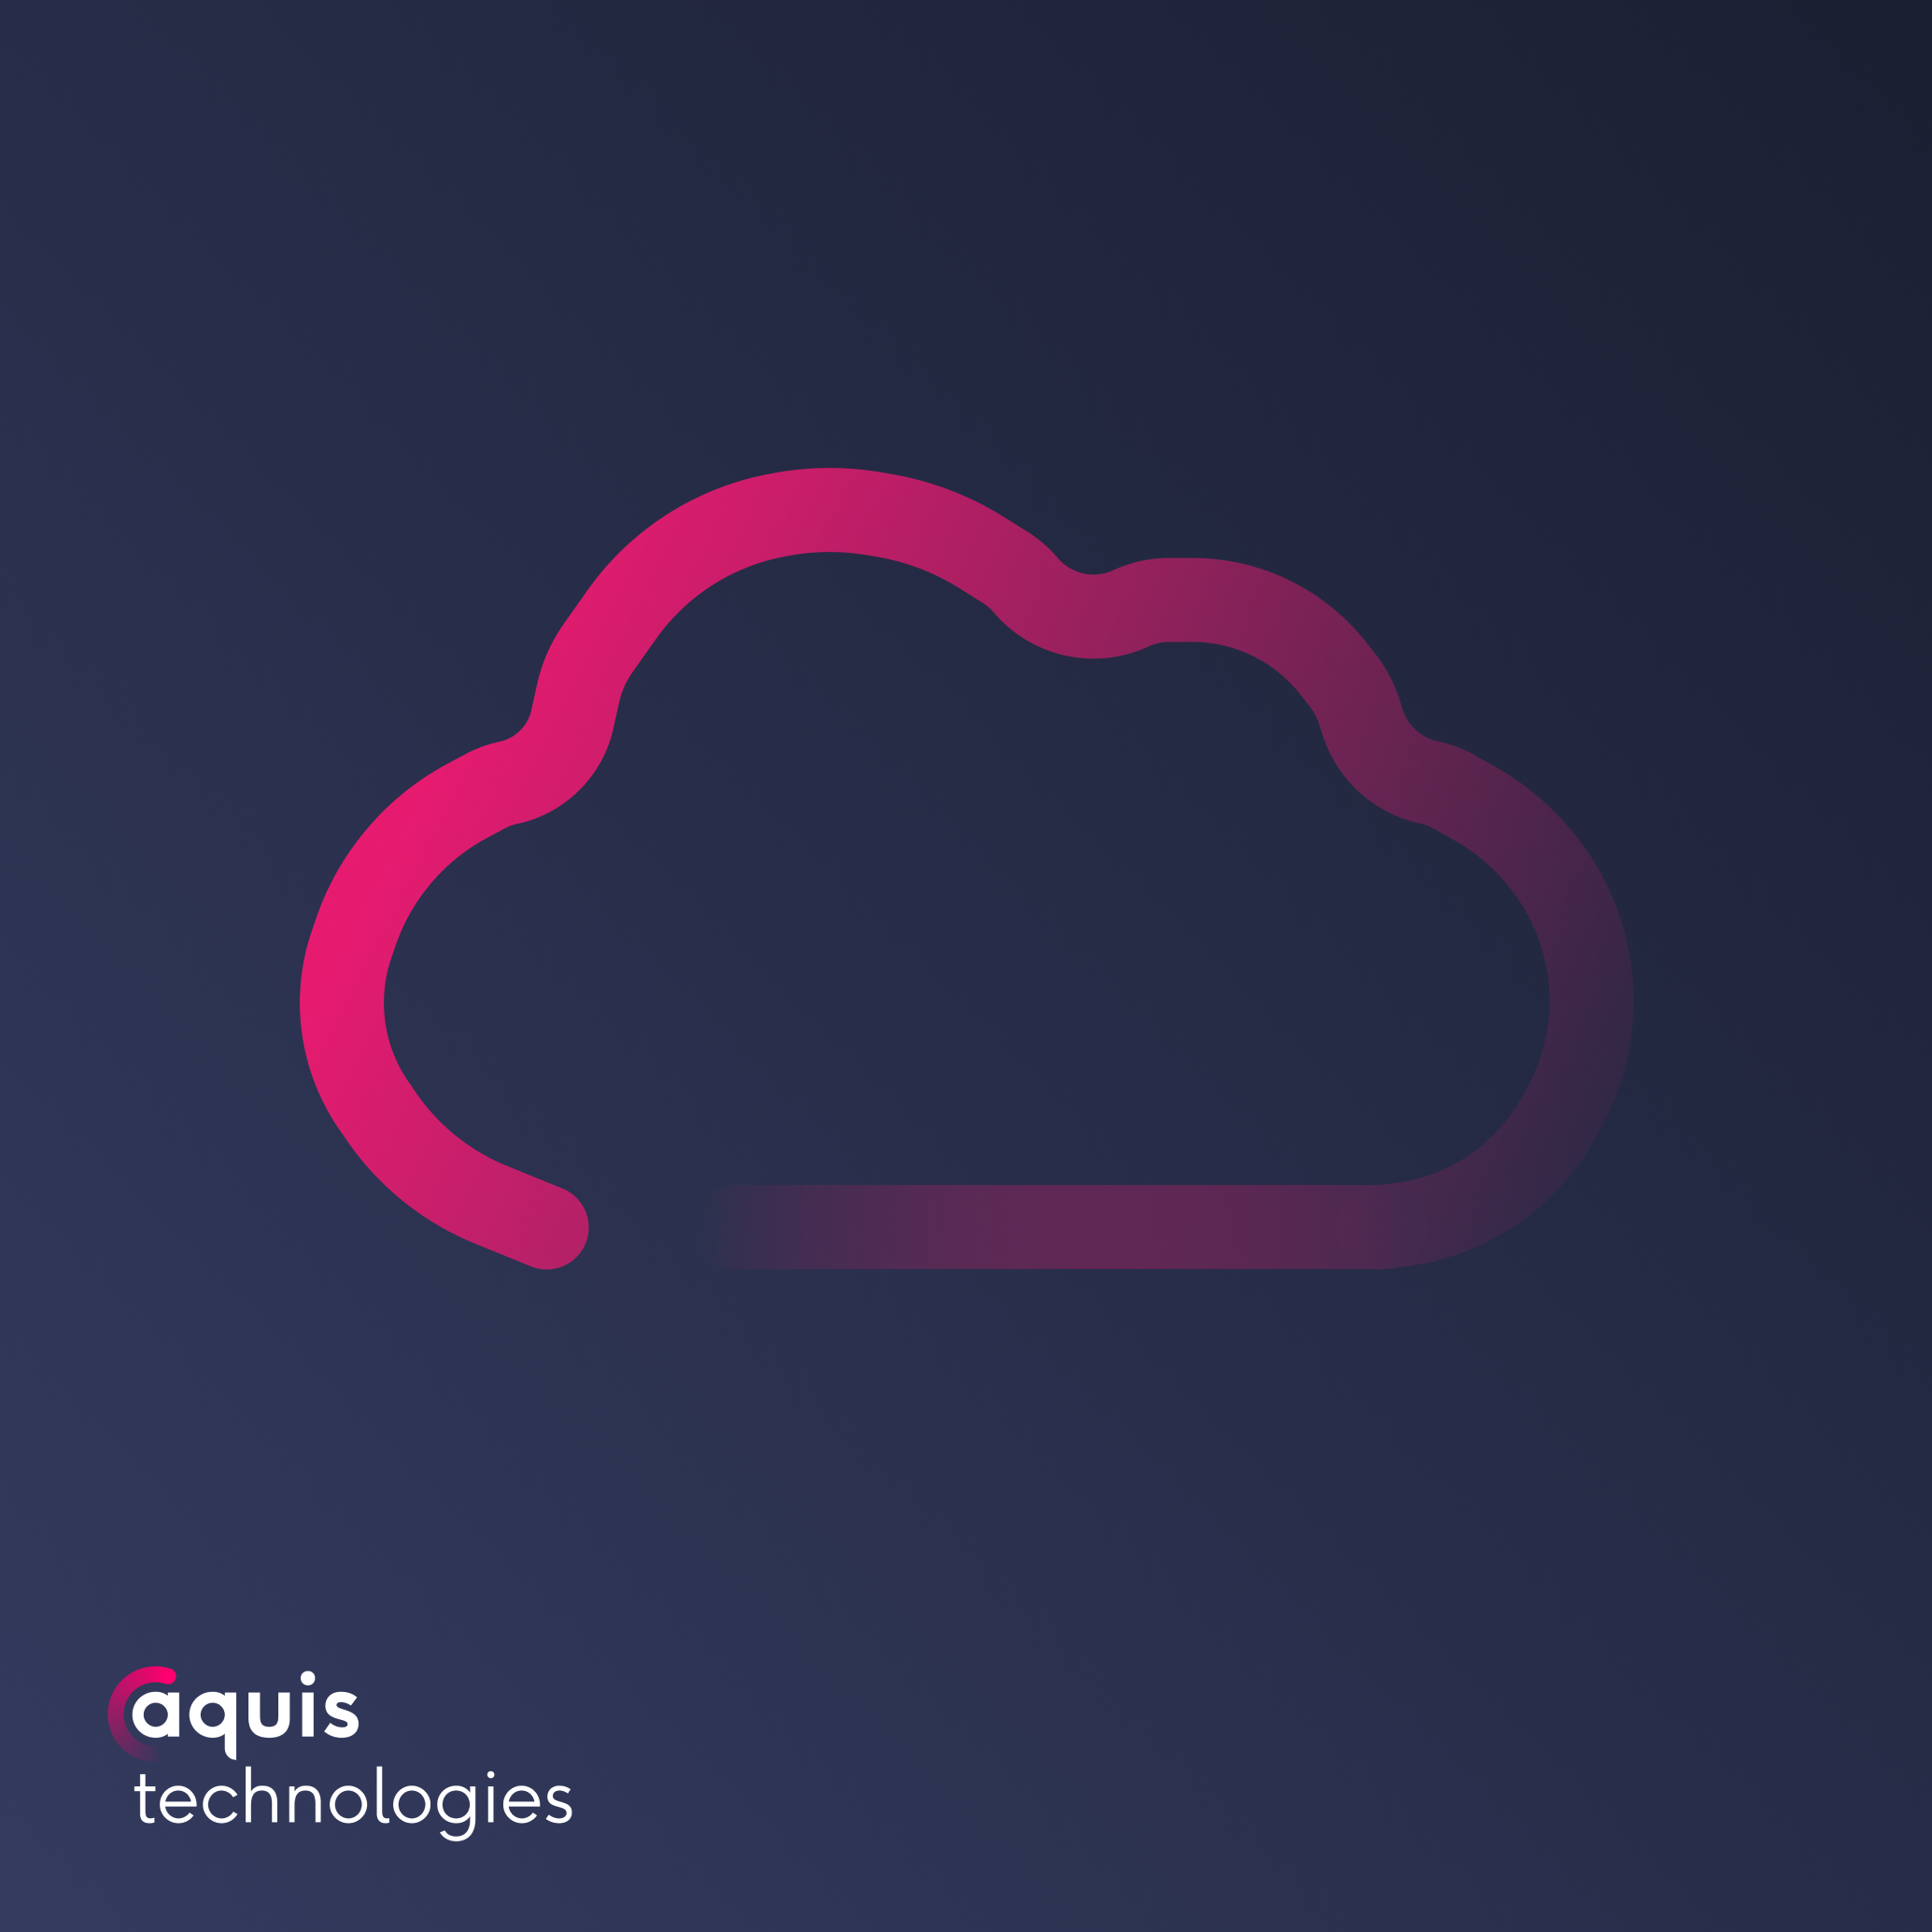 Aquis Stock Exchange becomes first cloud-based recognised investment exchange